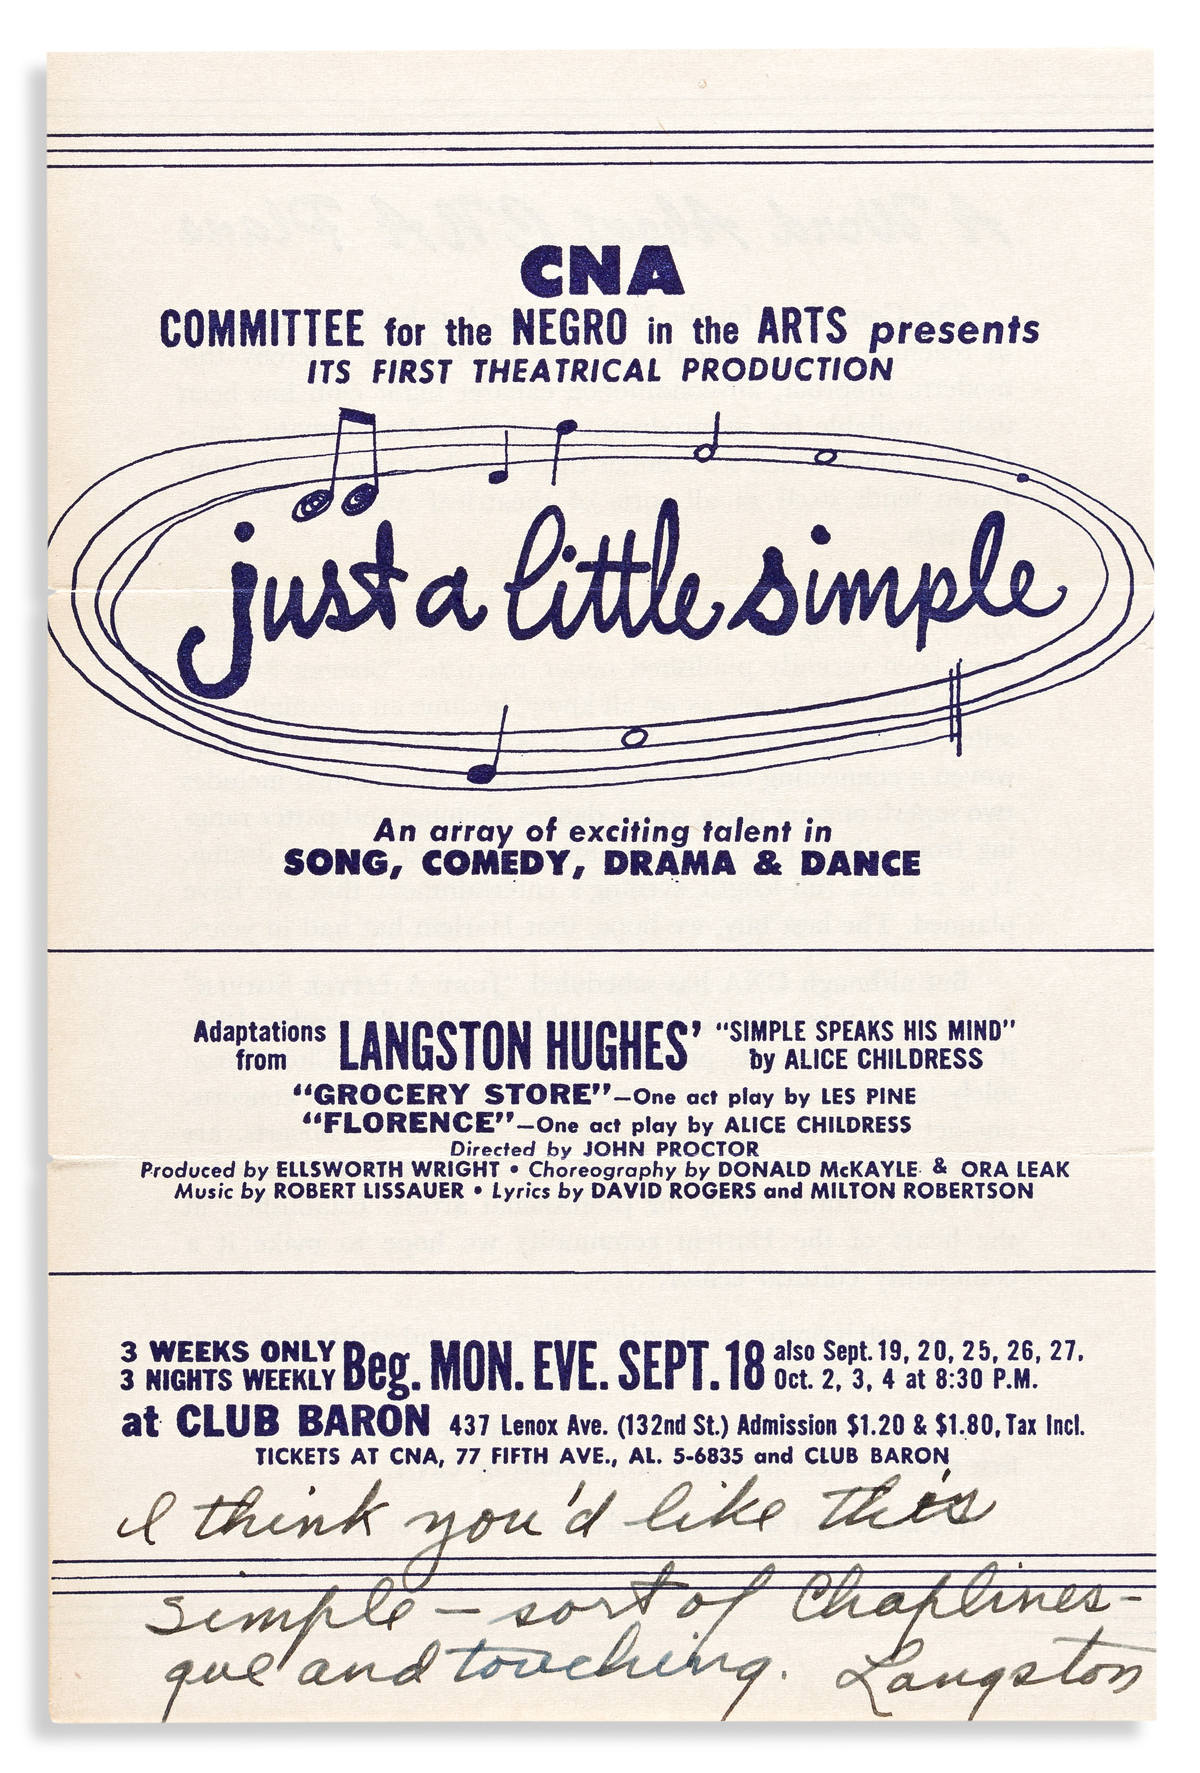 (LITERATURE.) Langston Hughes. His inscription on a program for a musical production of Just a Little Simple.